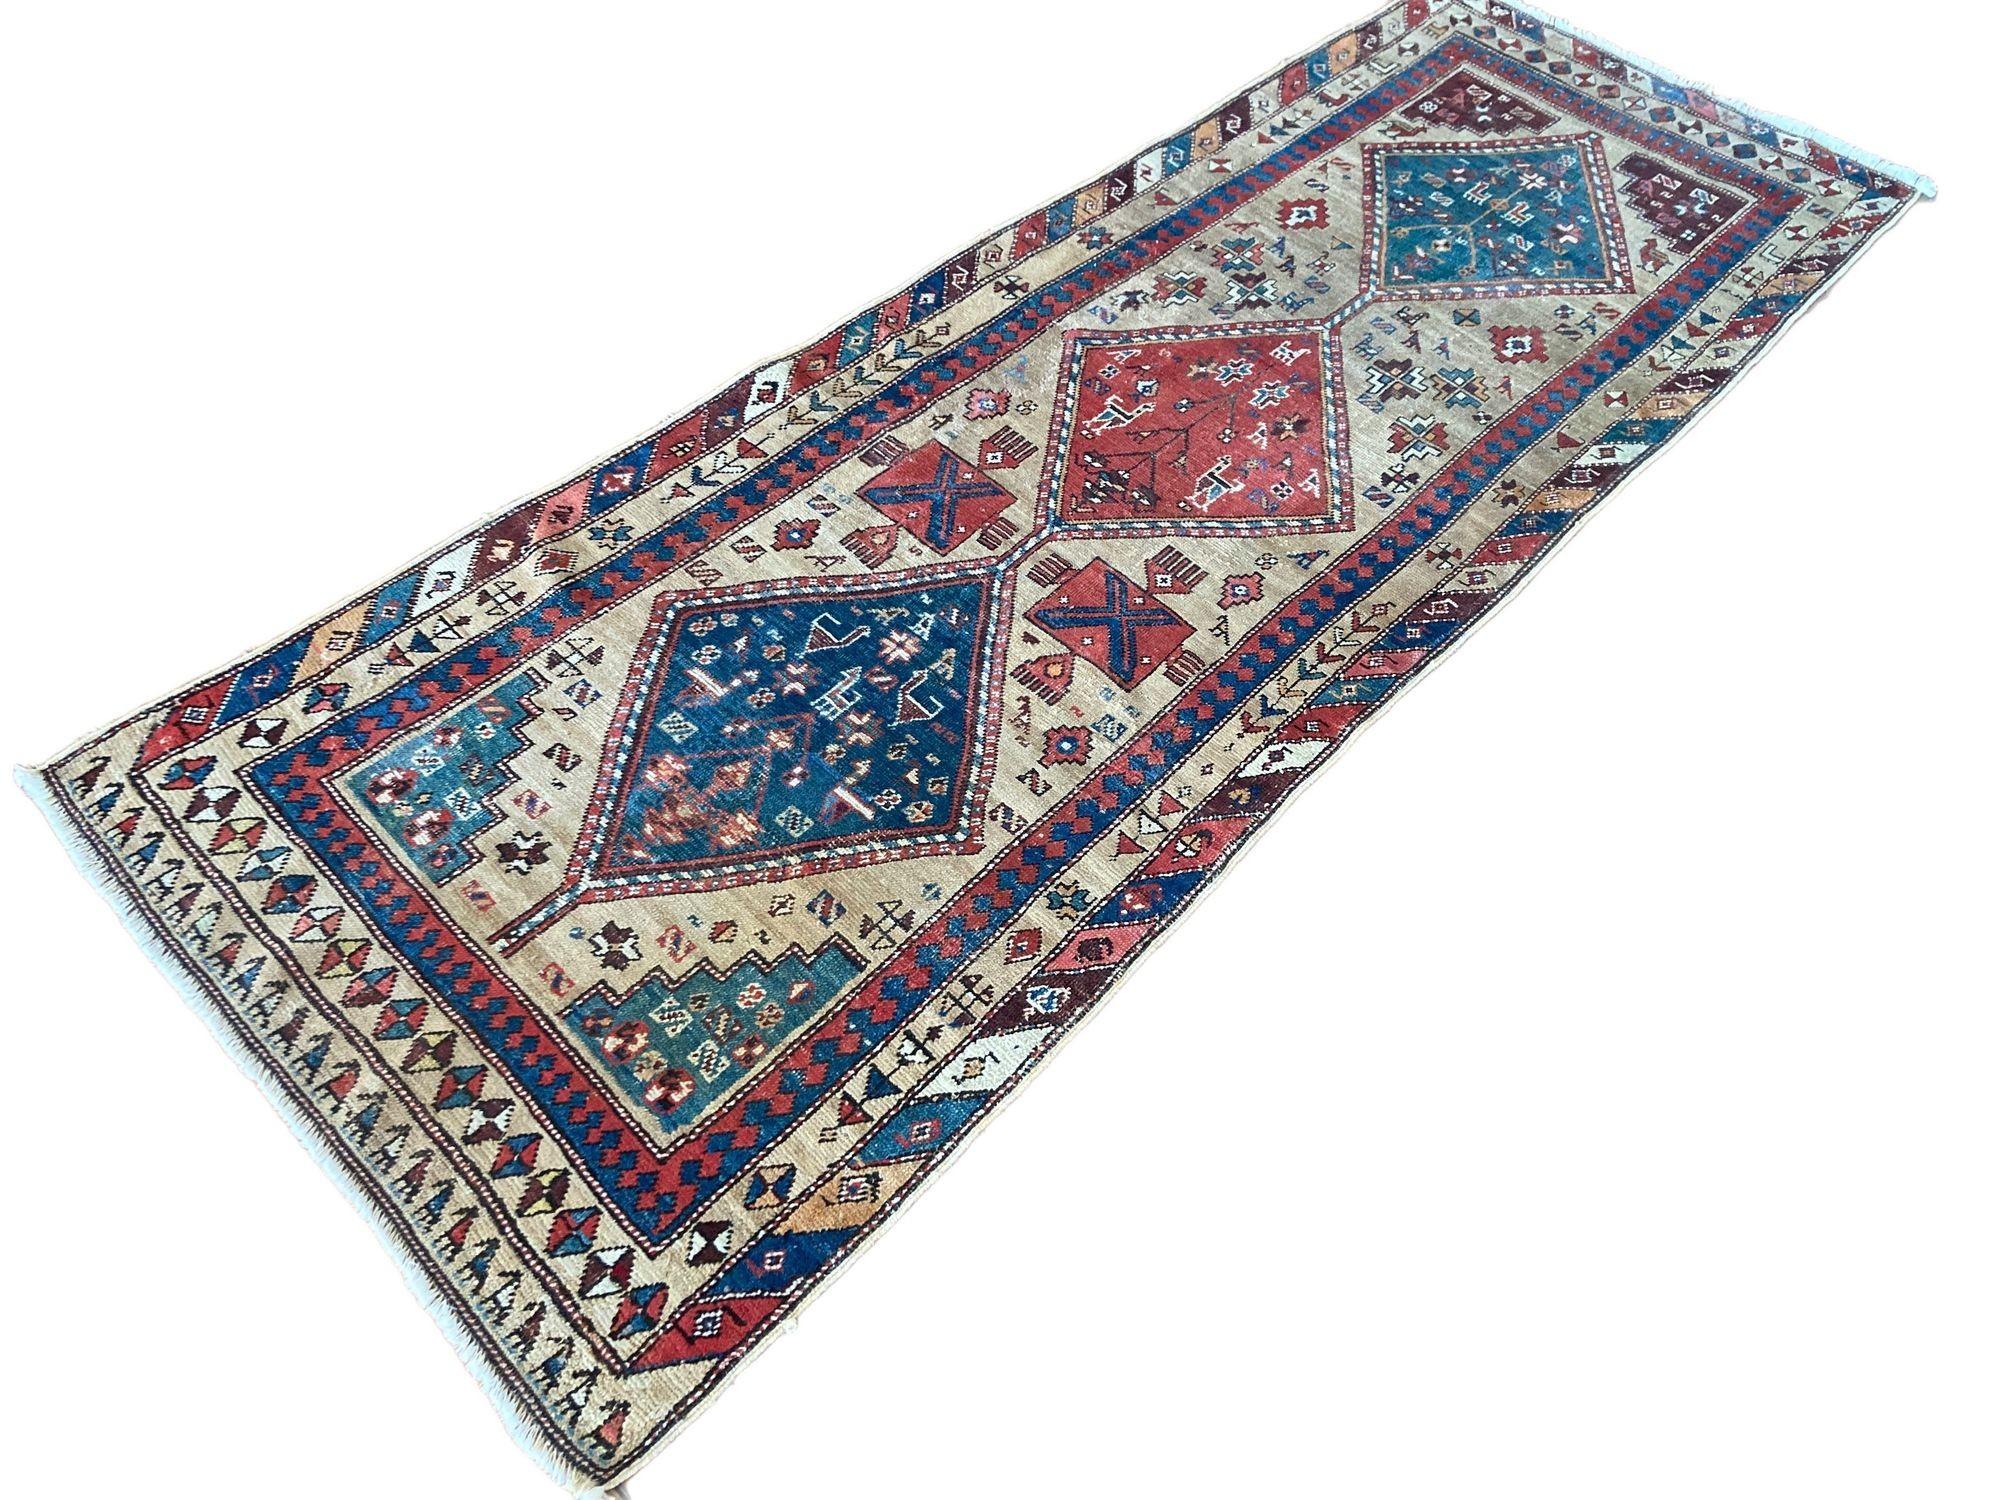 Antique Anatolian Runner 2.89m X 1.04m In Good Condition For Sale In St. Albans, GB